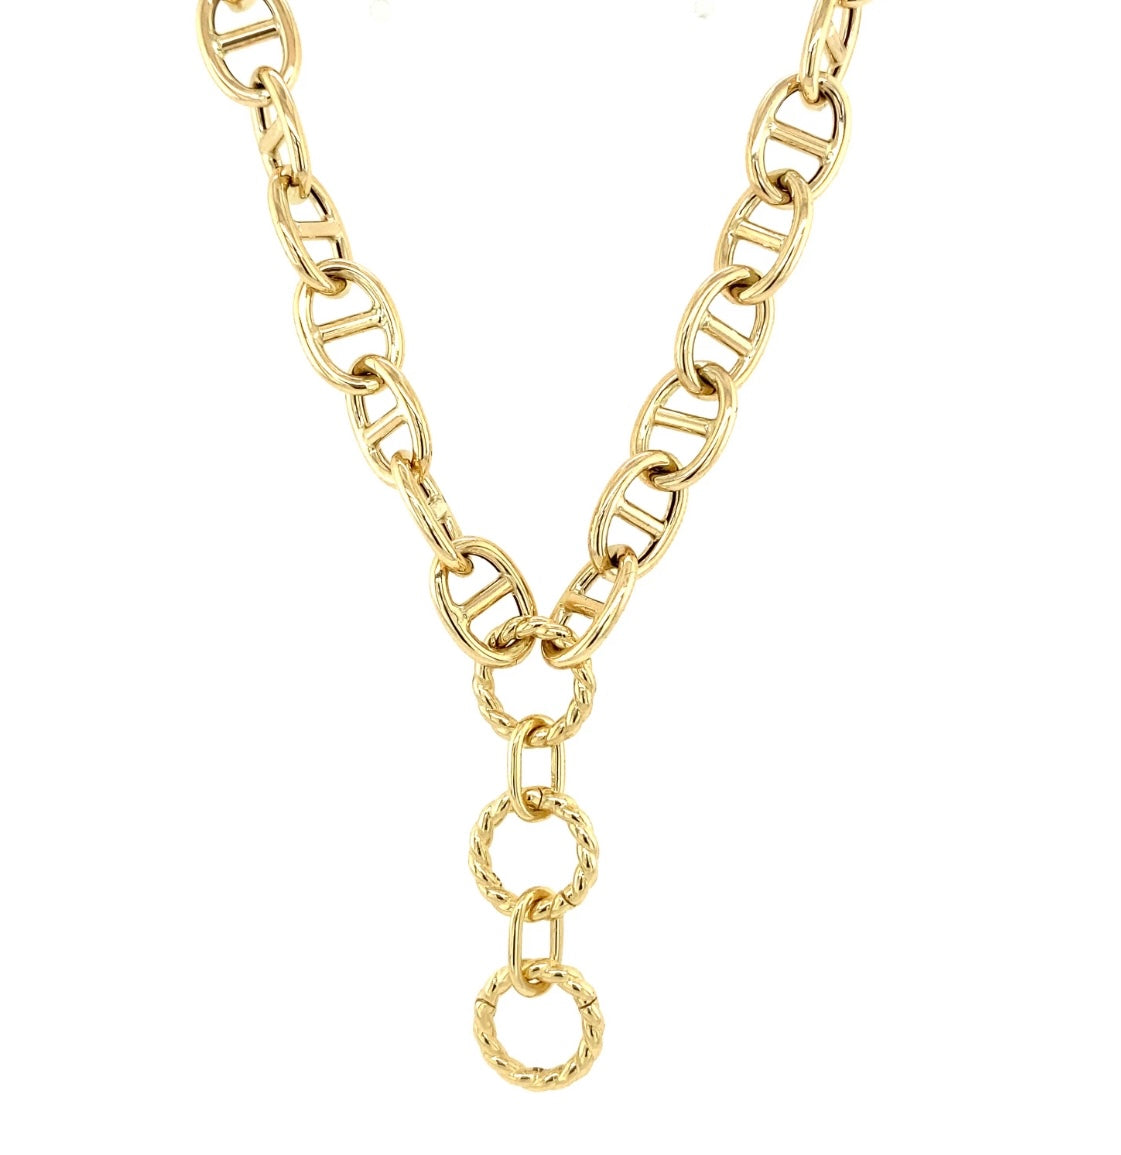 Cypress 14k Gold Chain with 3 round open clasps to add pendants